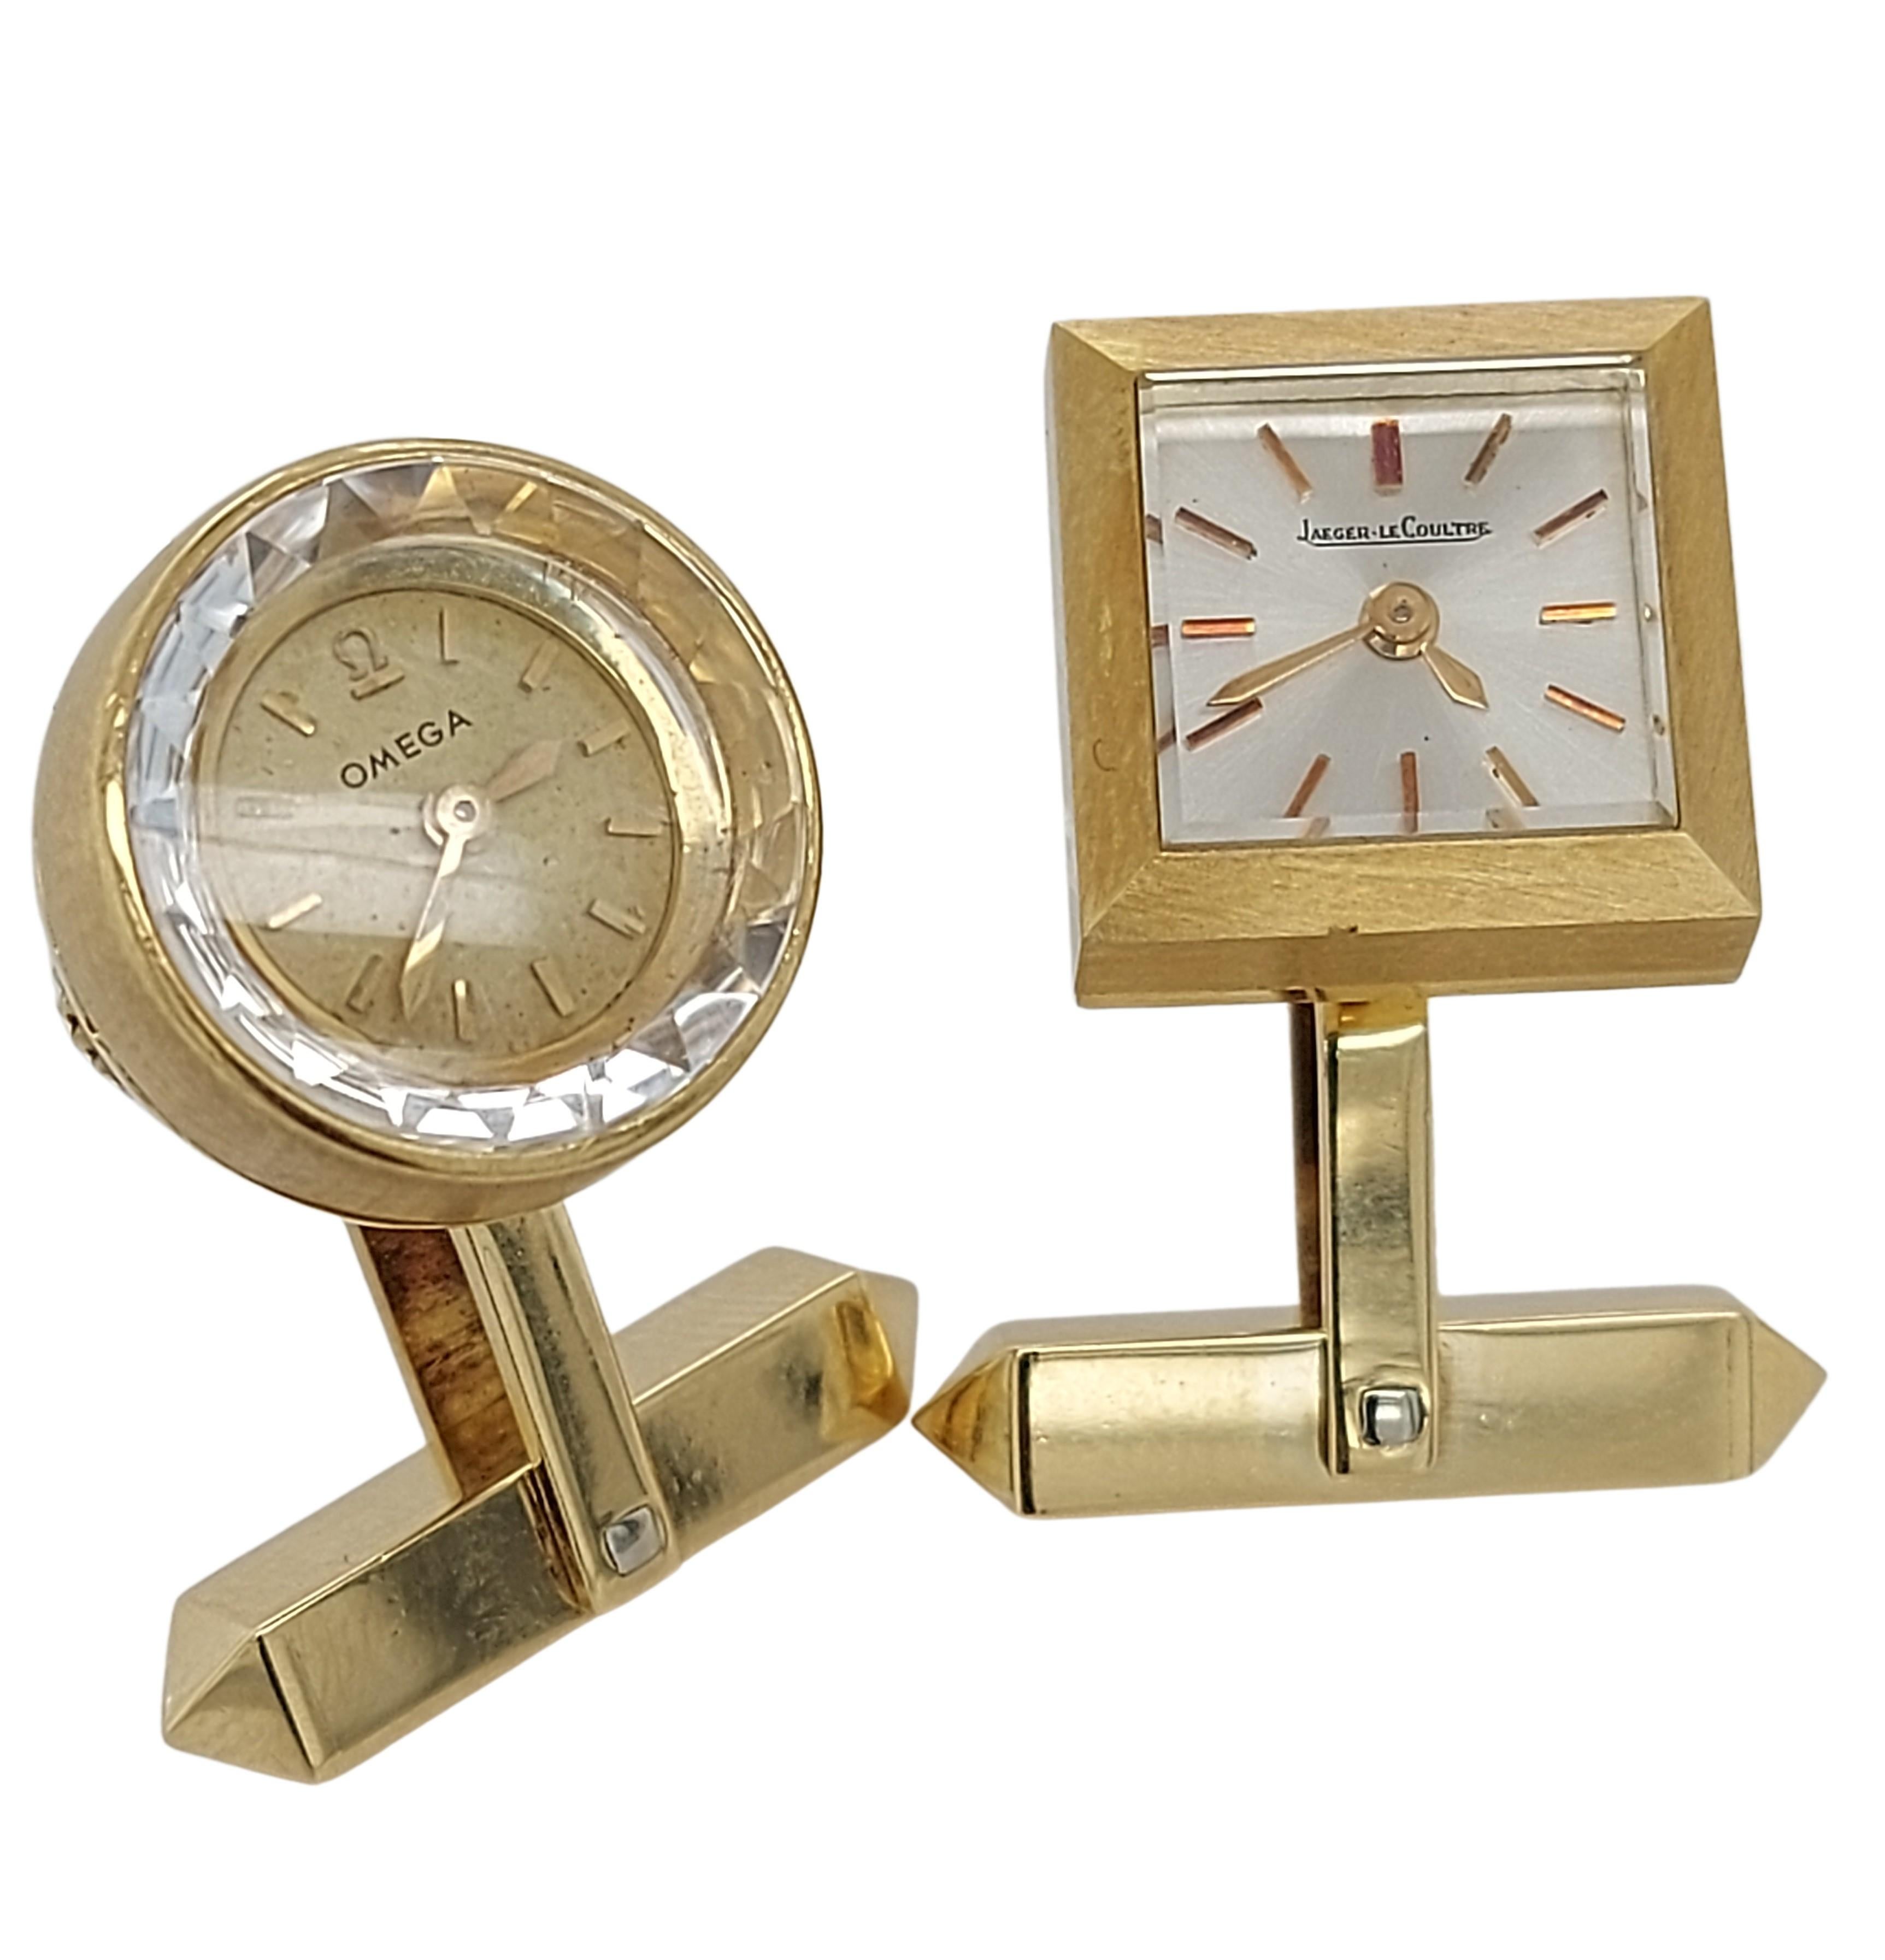 18kt Yellow Gold Cufflinks Round Omega, Square Jaeger LeCoultre 

Amazing Collector item !

Watches work and keep time.

Omega Cufflink
Material: 18 kt yellow gold
Manual backwinding
Gold dial with applied gold indexes.
Weight: 11.6 gram / 0.410 oz